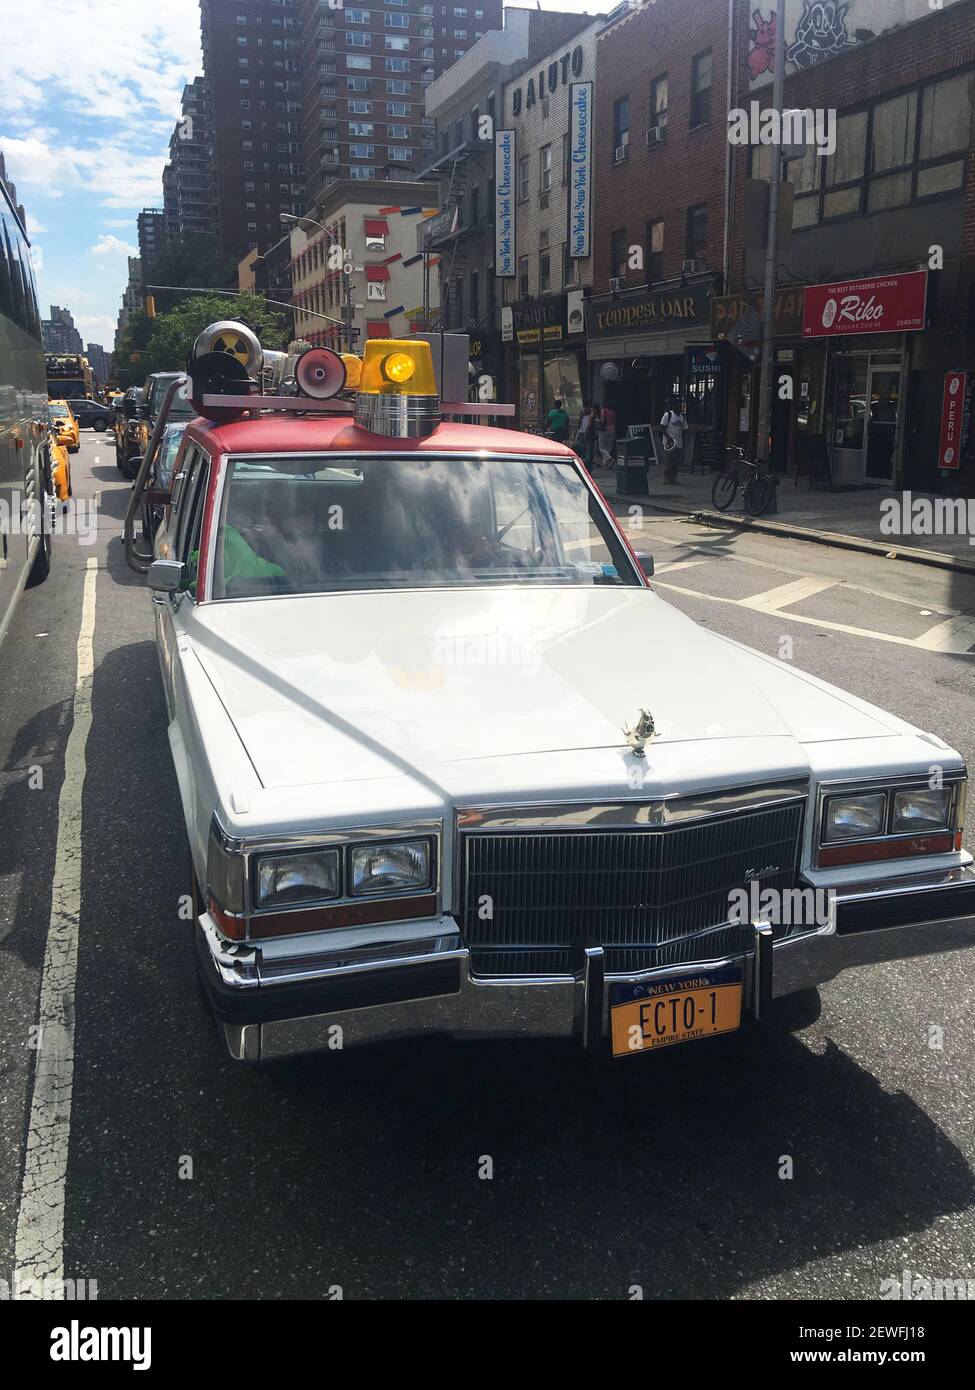 Atmosphere at Ghostbuster Ecto-1 Car Sighting in Manhattan - Promotion of new Ghostbusters Movie  on July 15, 2016 in New York City, USA. (Photo by Steve Eichner) Stock Photo